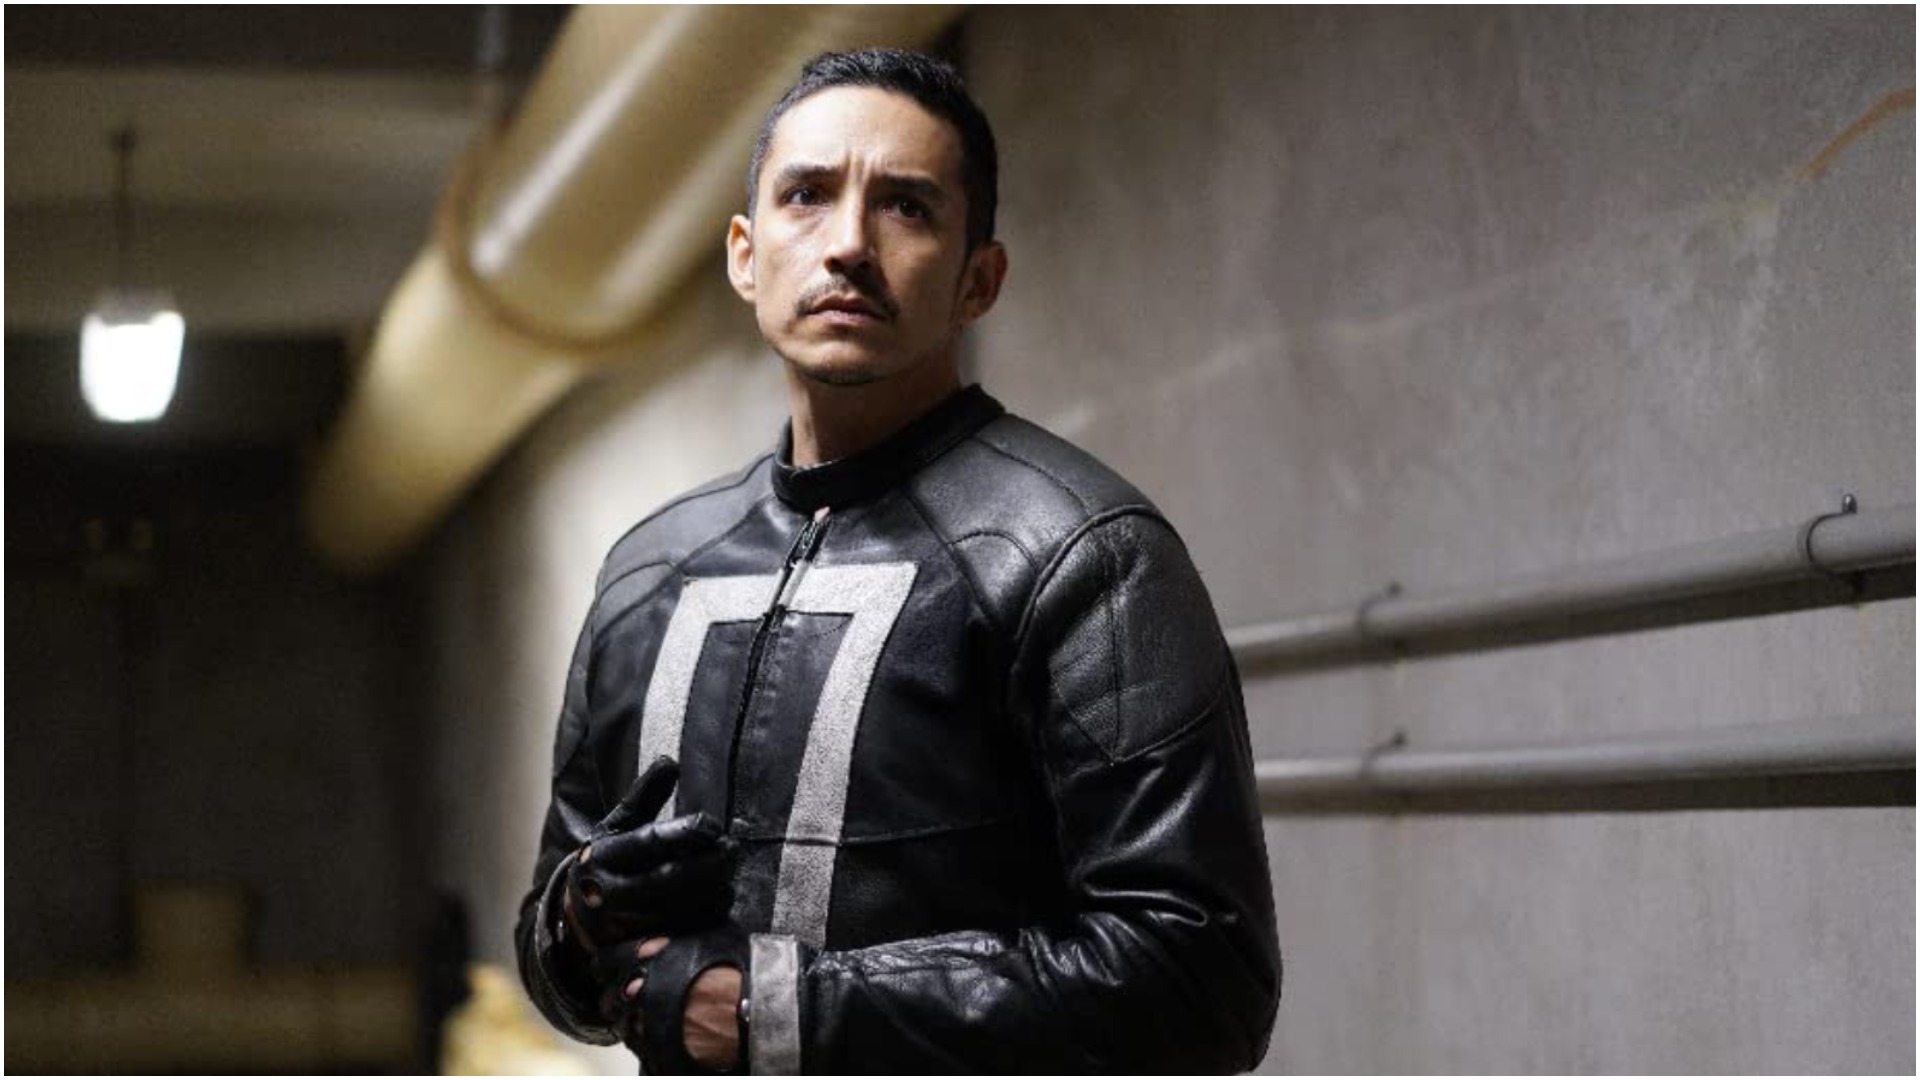 The Last Of Us': Gabriel Luna To Play Tommy In HBO Series Based On